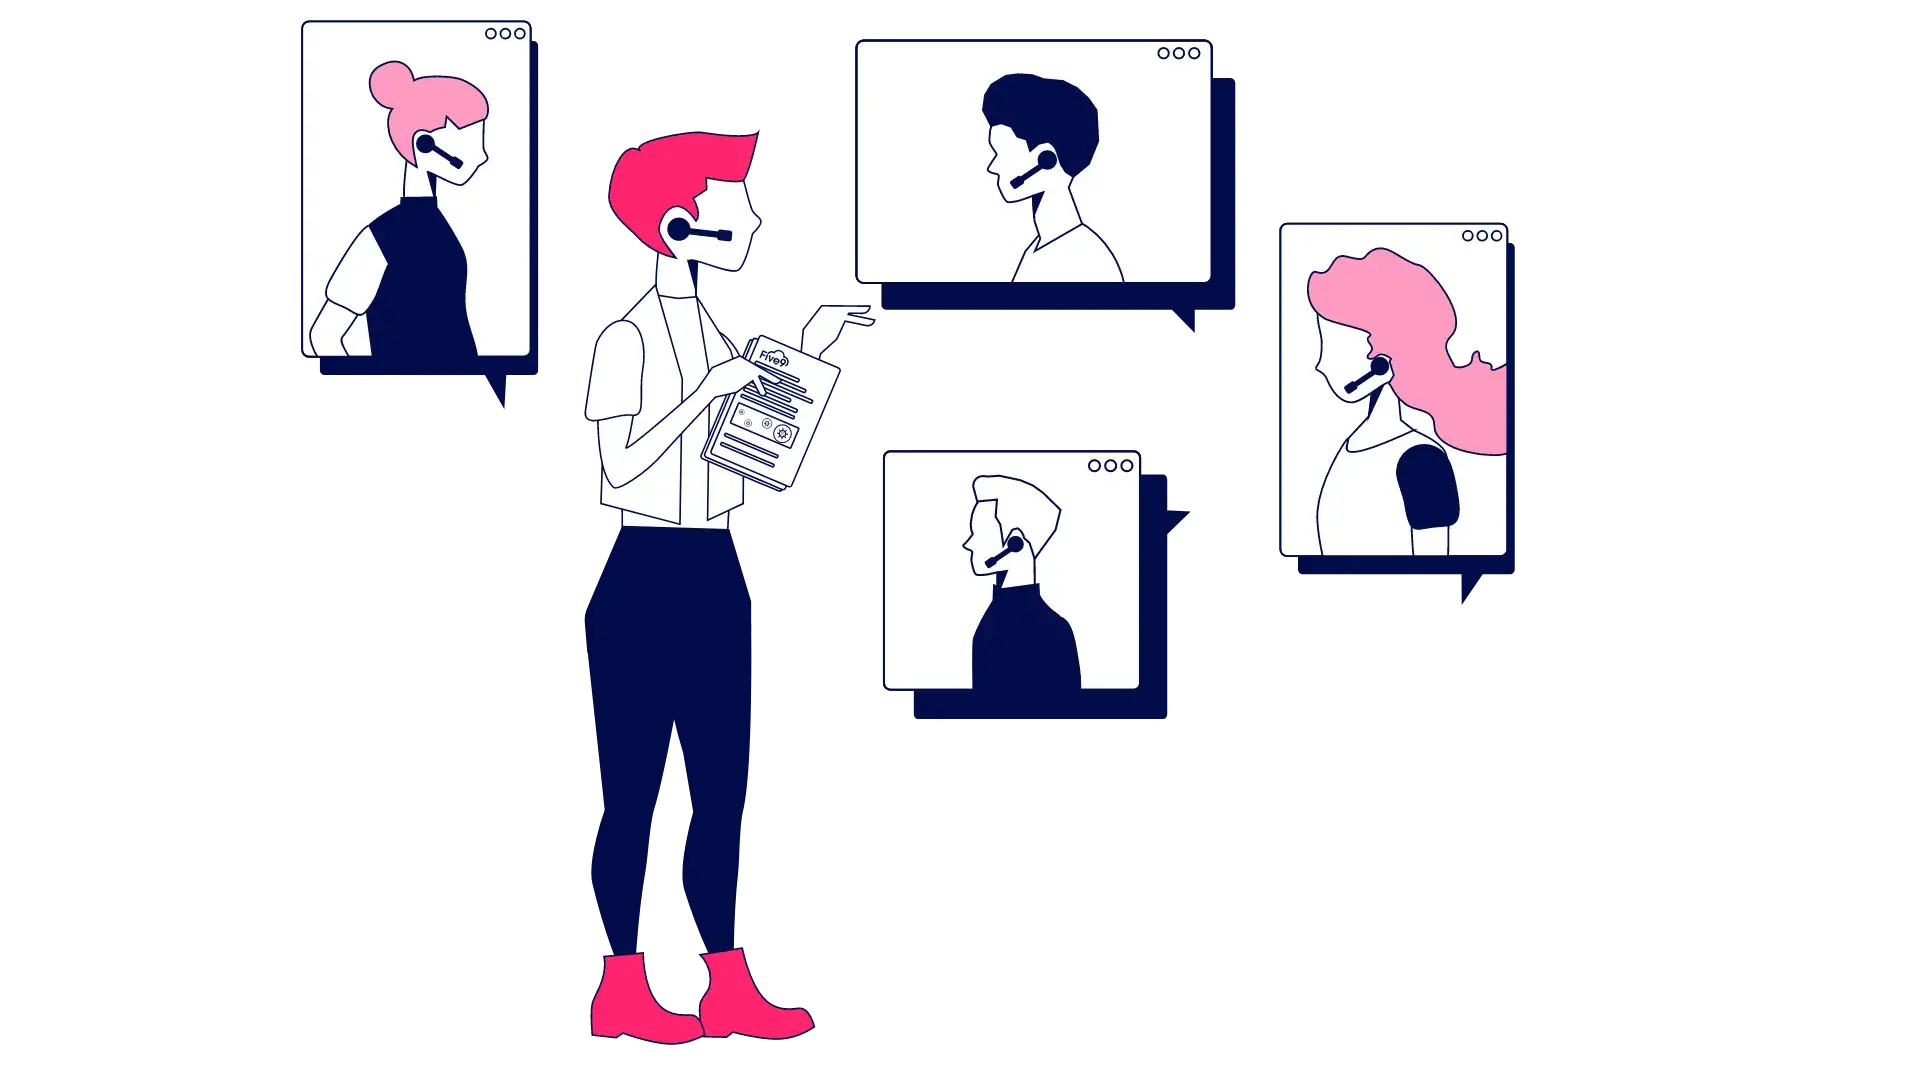 Colorful graphic of a woman voice chatting with four people on video